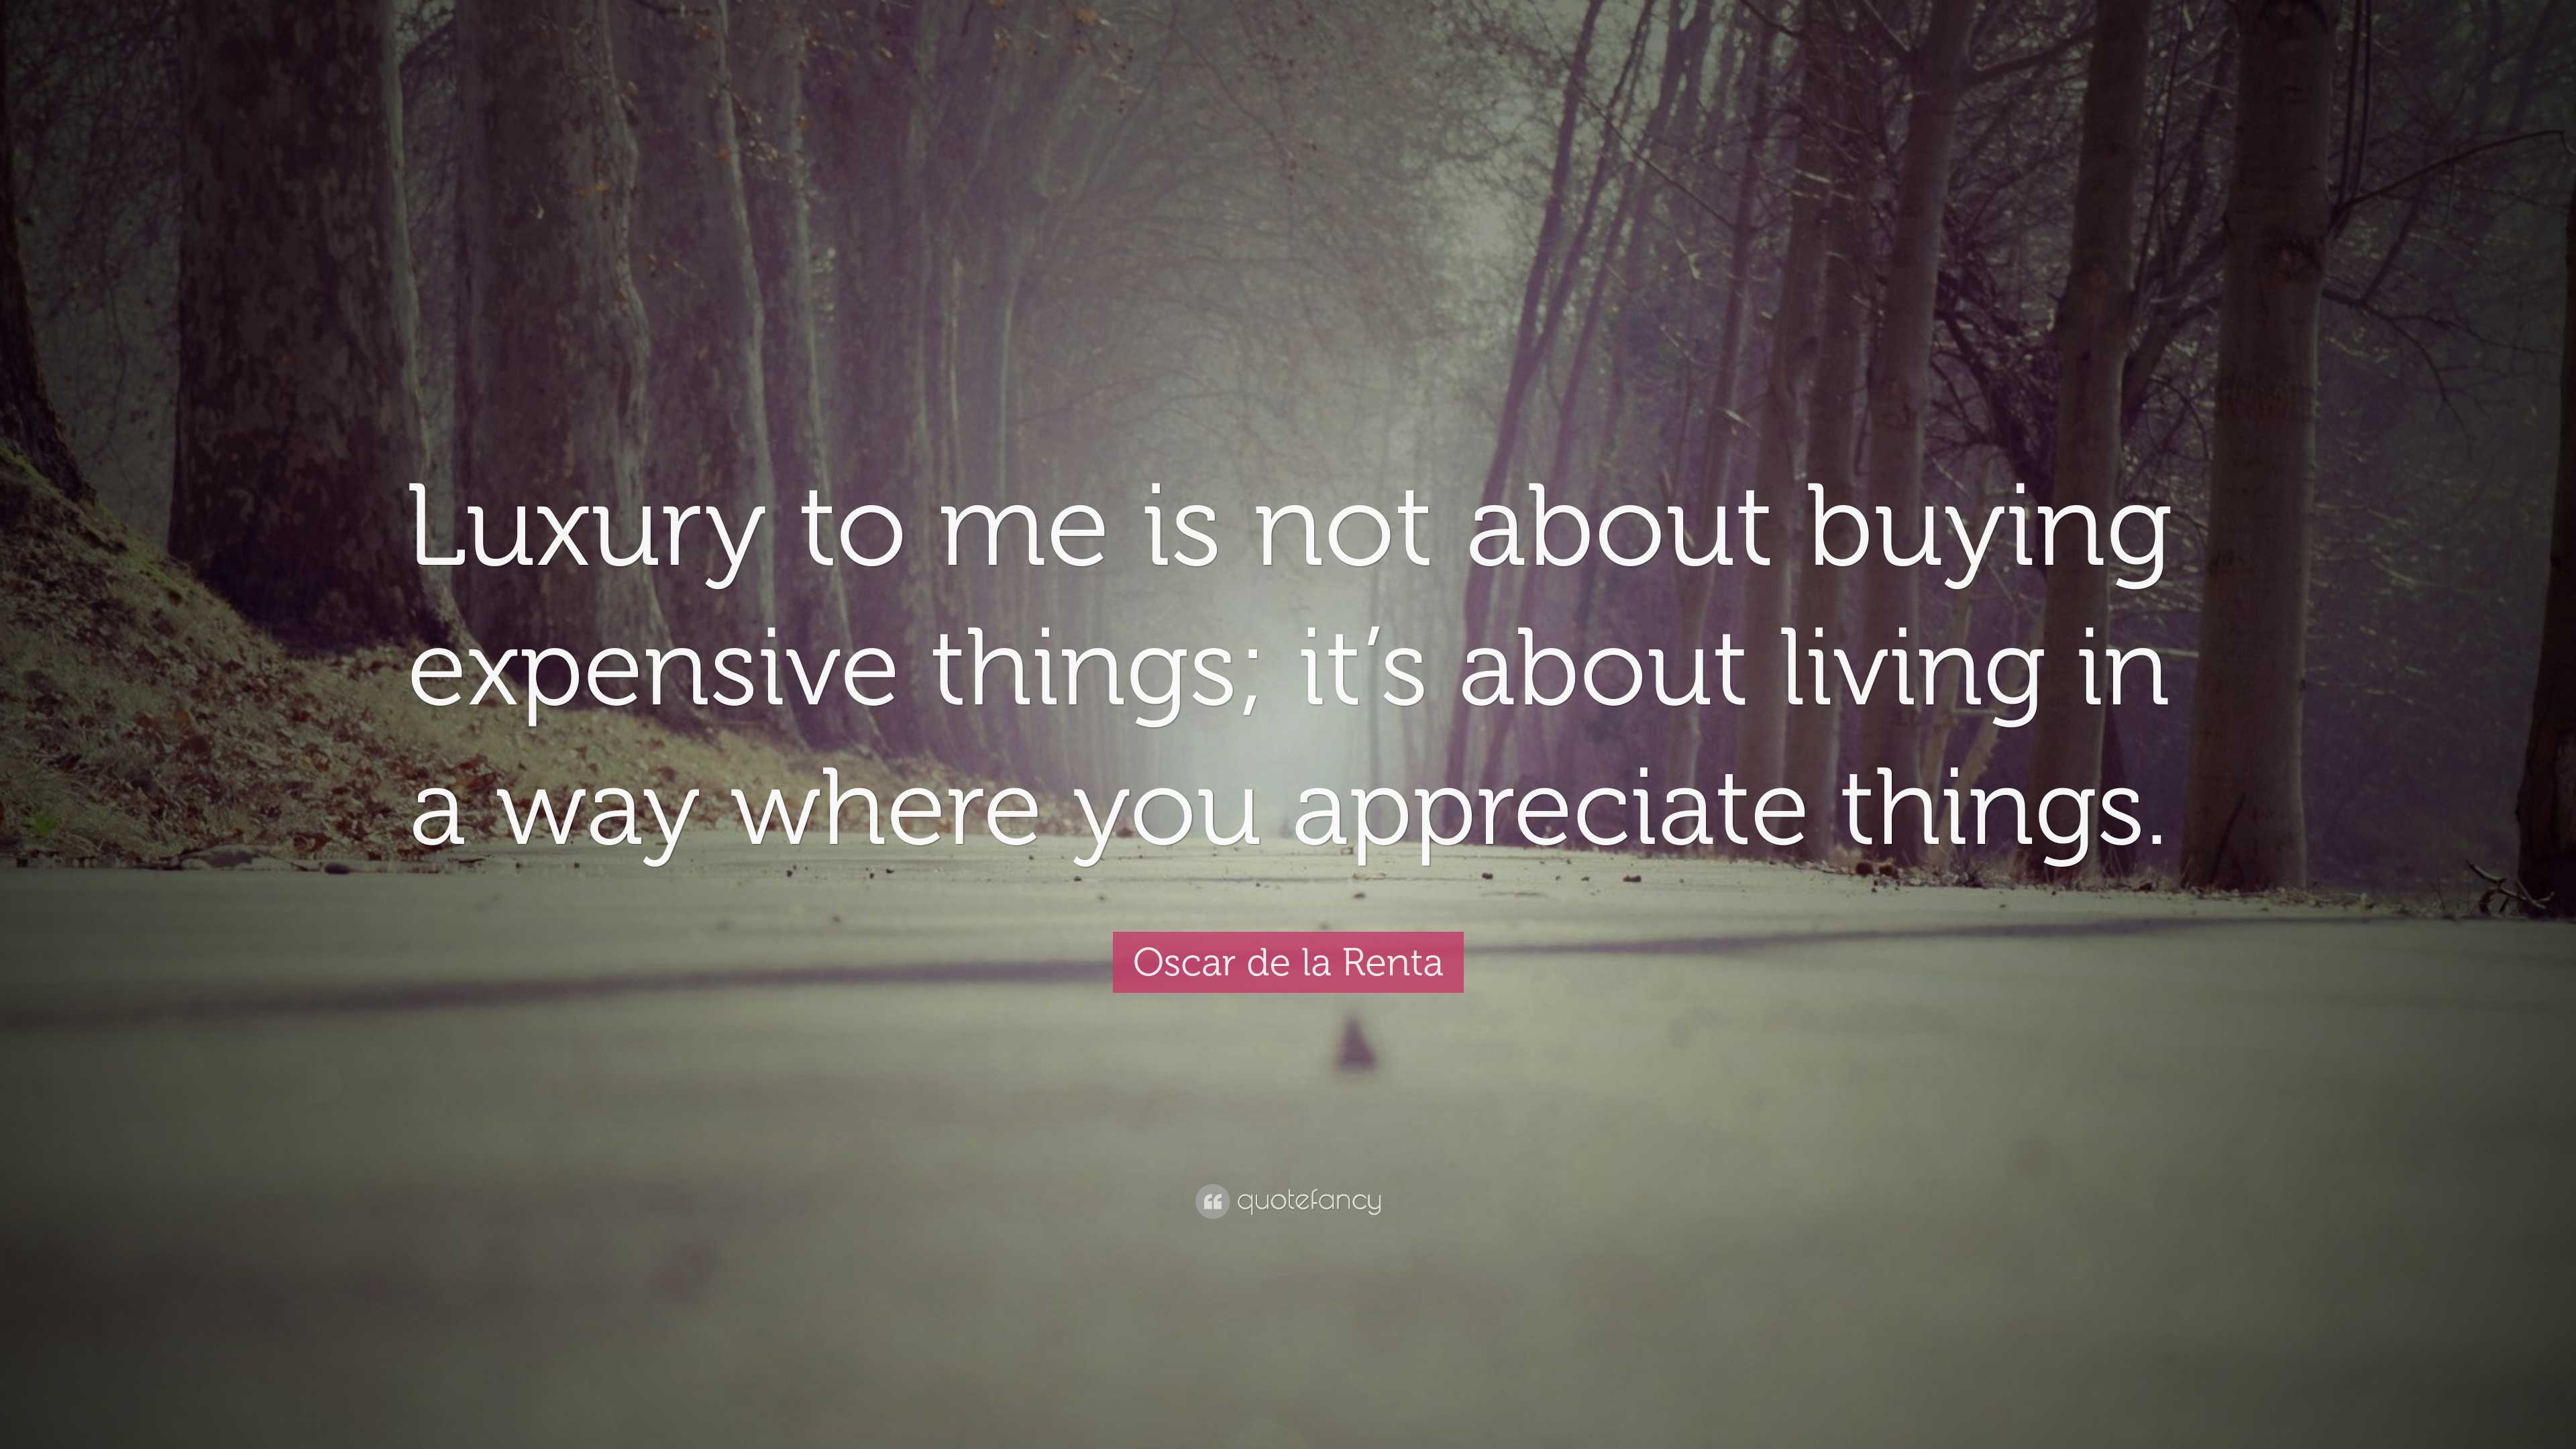 Luxury to me is not about buying expensive things; it's about